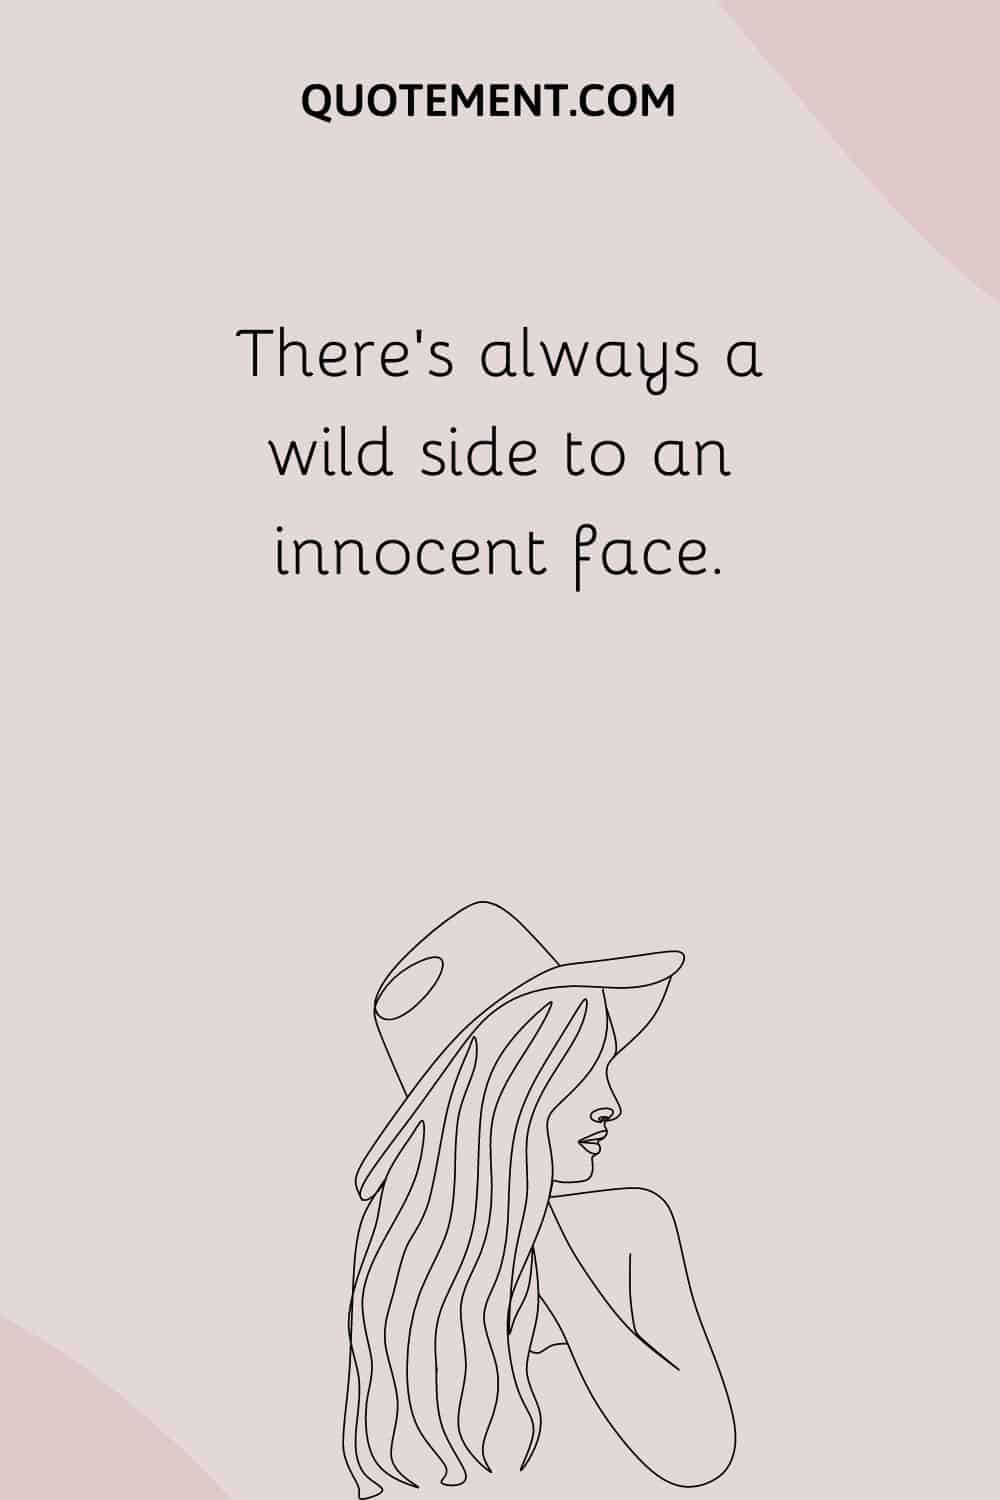 theres always a wild side to an innocent face